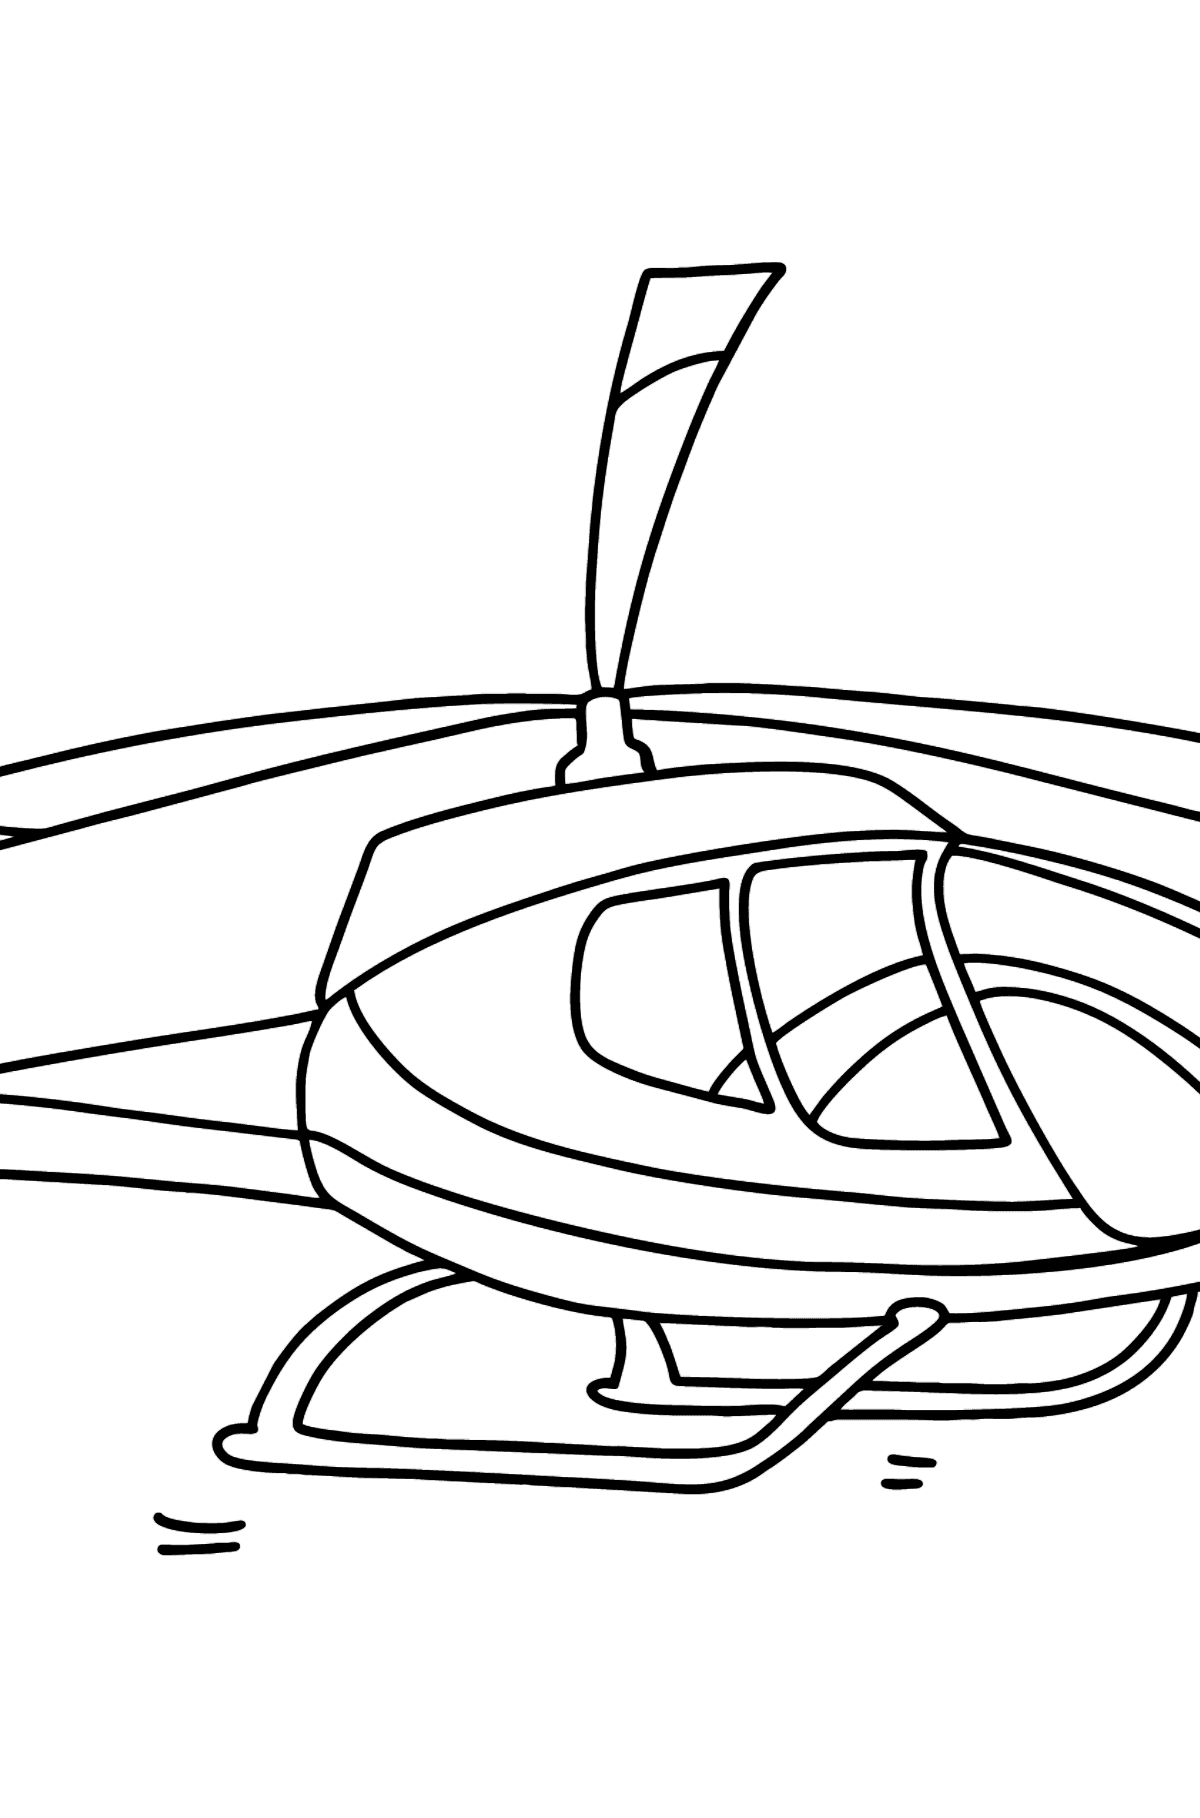 Beautiful Helicopter coloring page - Coloring Pages for Kids